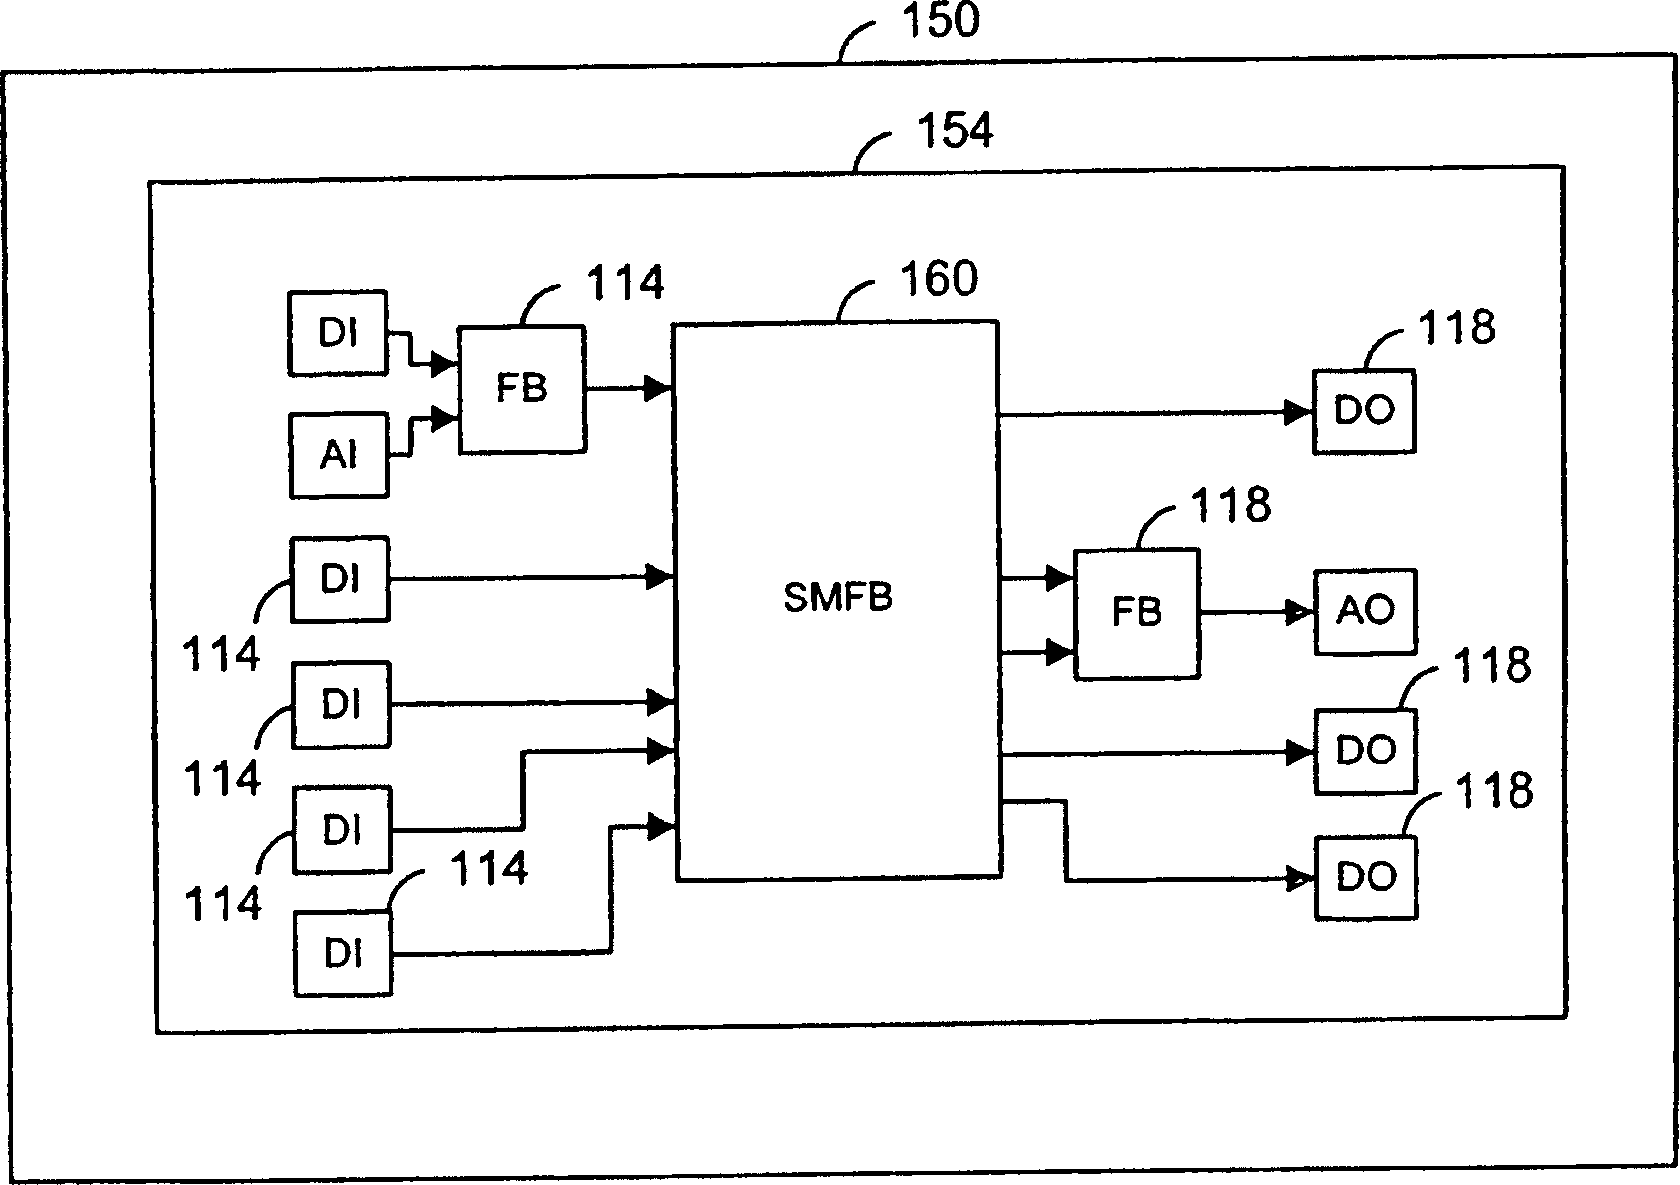 State machine function block with a user modifiable output configuration database